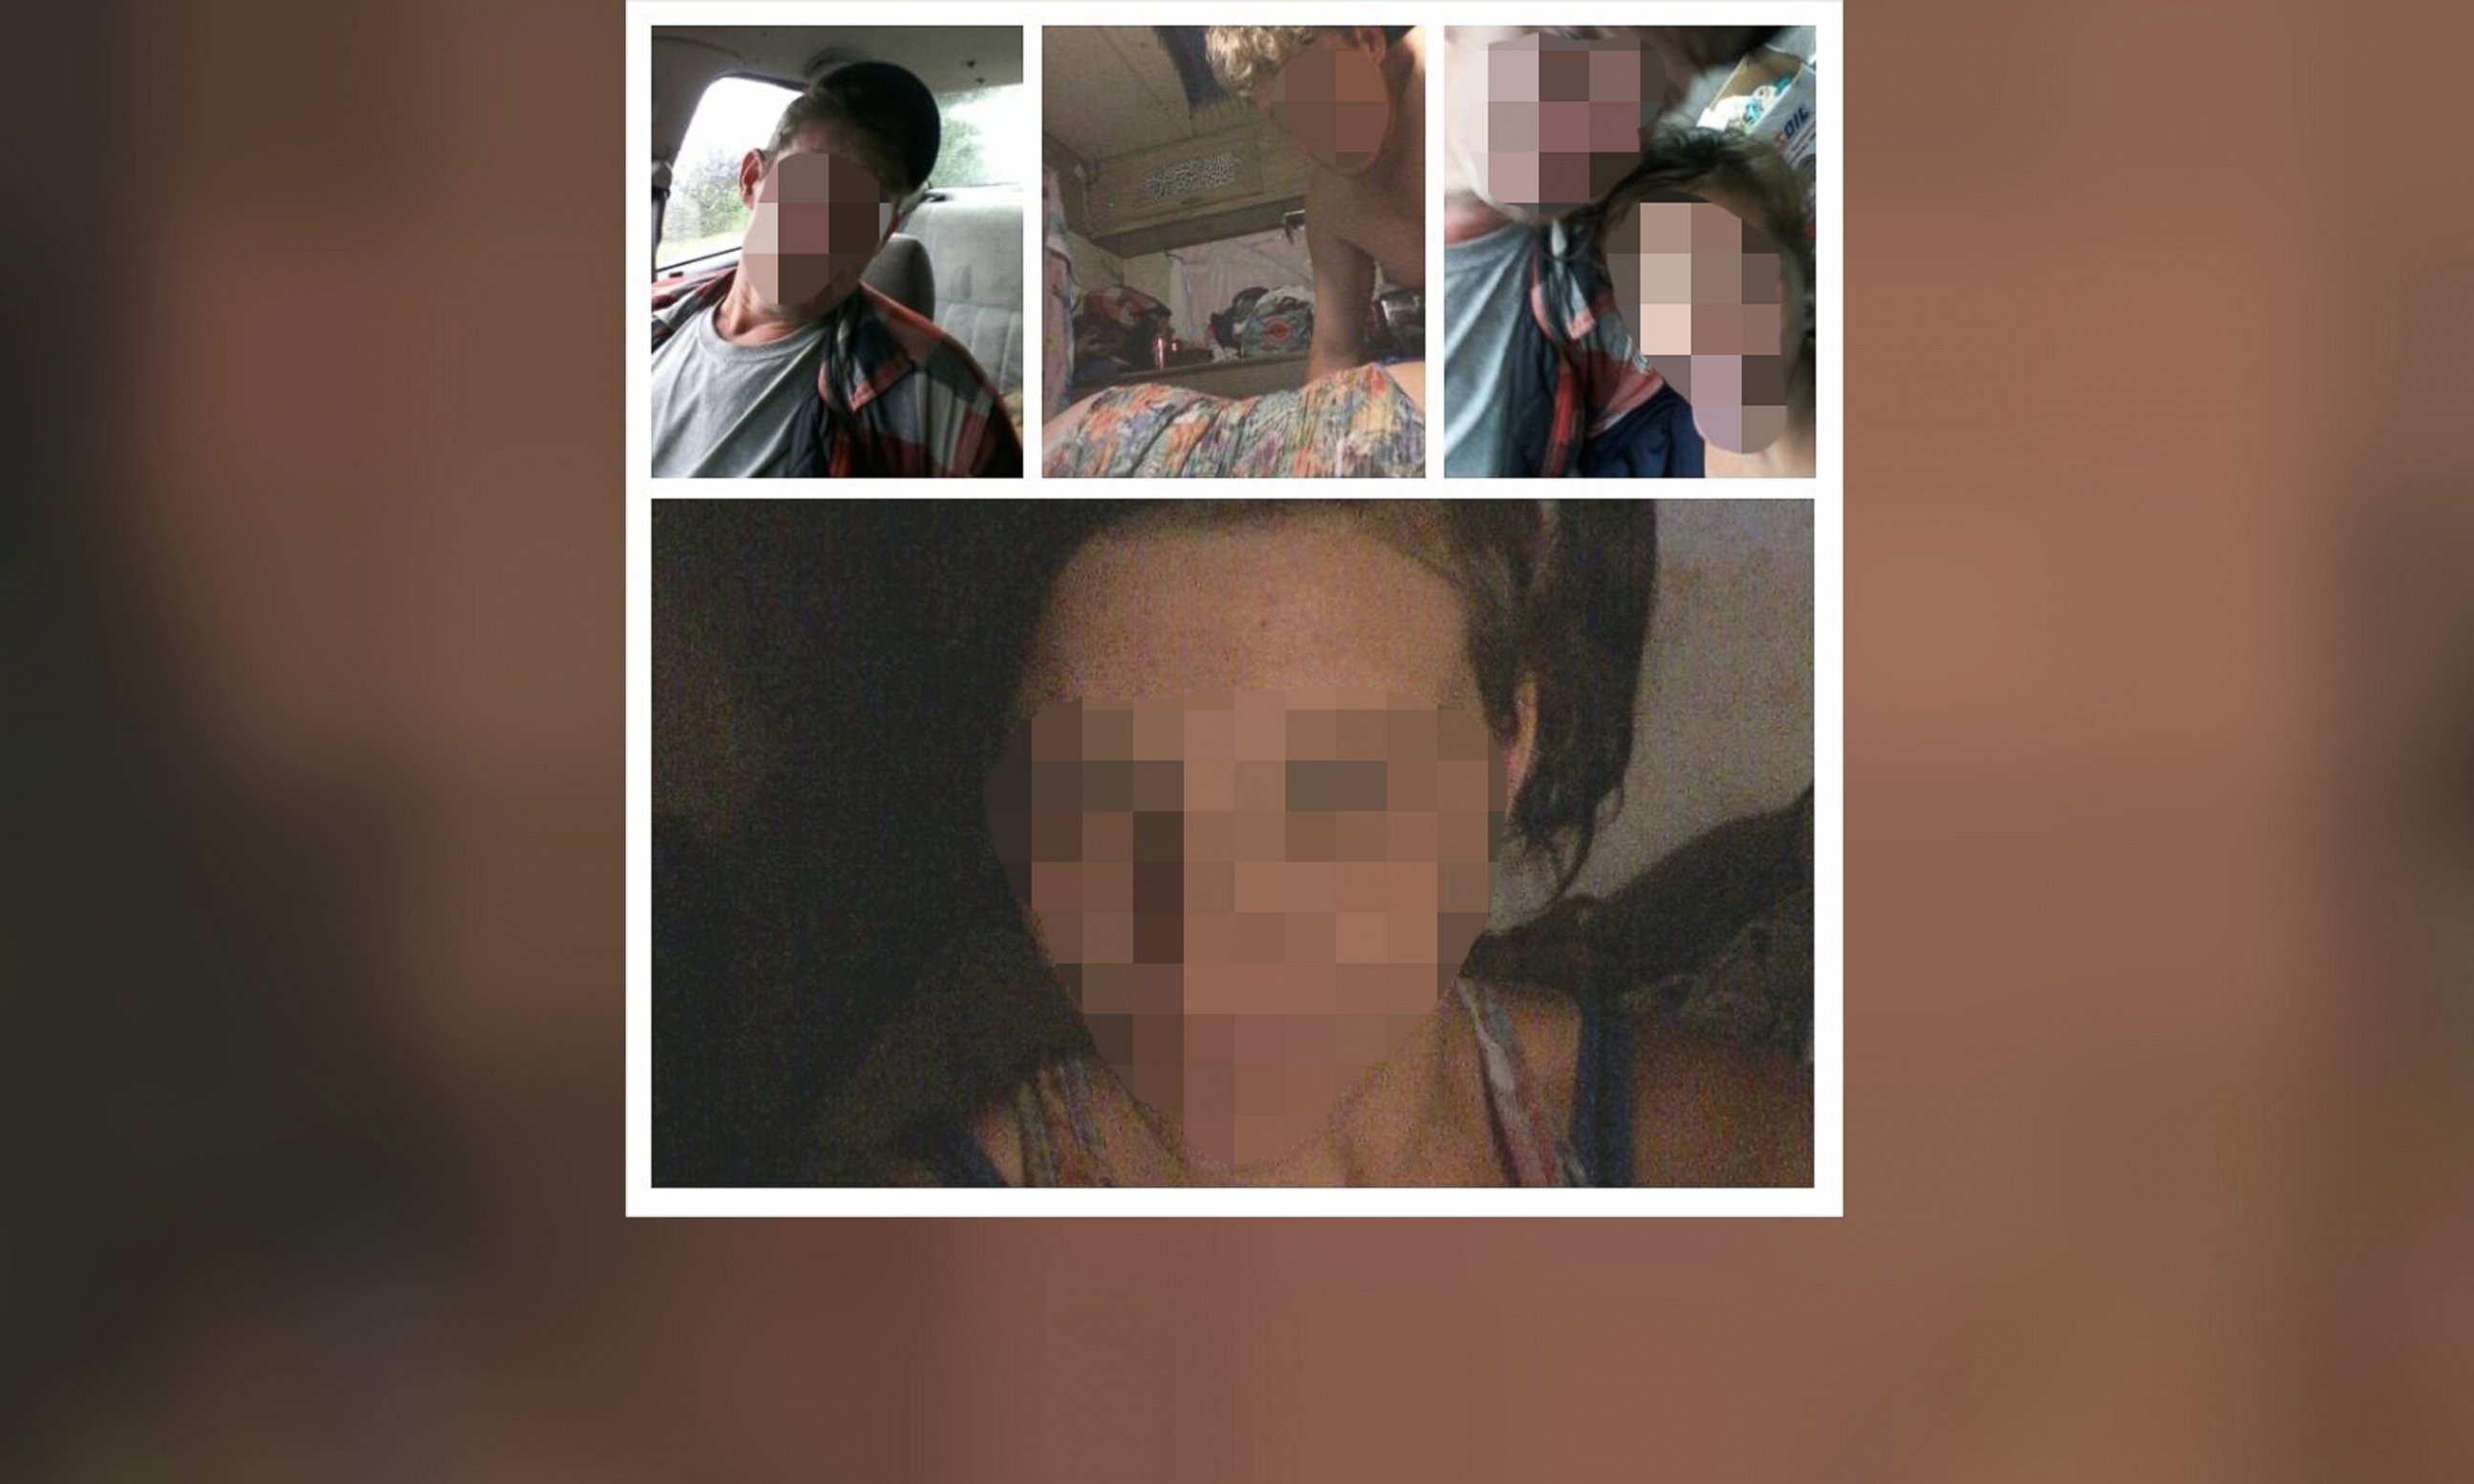 PHOTO: Jeremy Yeado of Spokane, Wash. posted these images to his Facebook page on June 29, 2014, saying that they were transmitted from his tablet computer which had recently been stolen. 